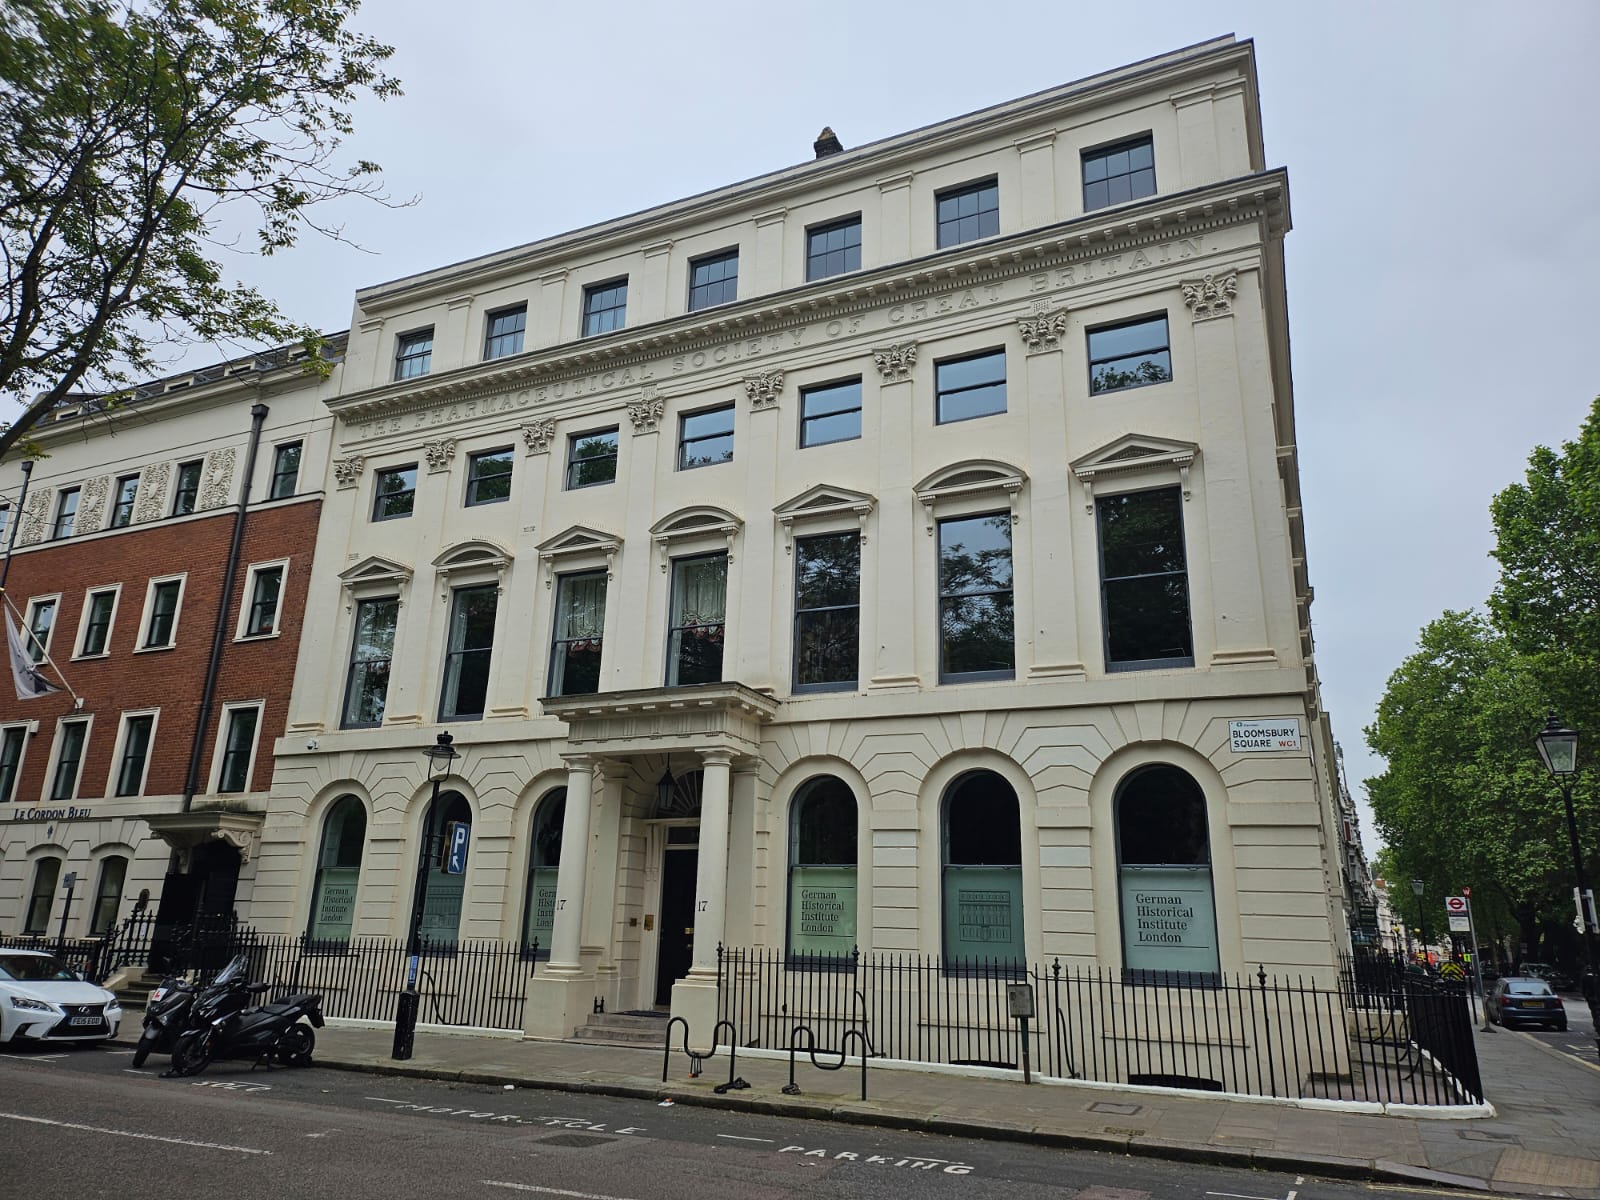 The former building of the Royal Pharmaceutical Society on Bloomsbury Square. A classical, regency building. White. Four stories tall with a symetrical frontage and a central pillared entrance. Surrounded by railings.